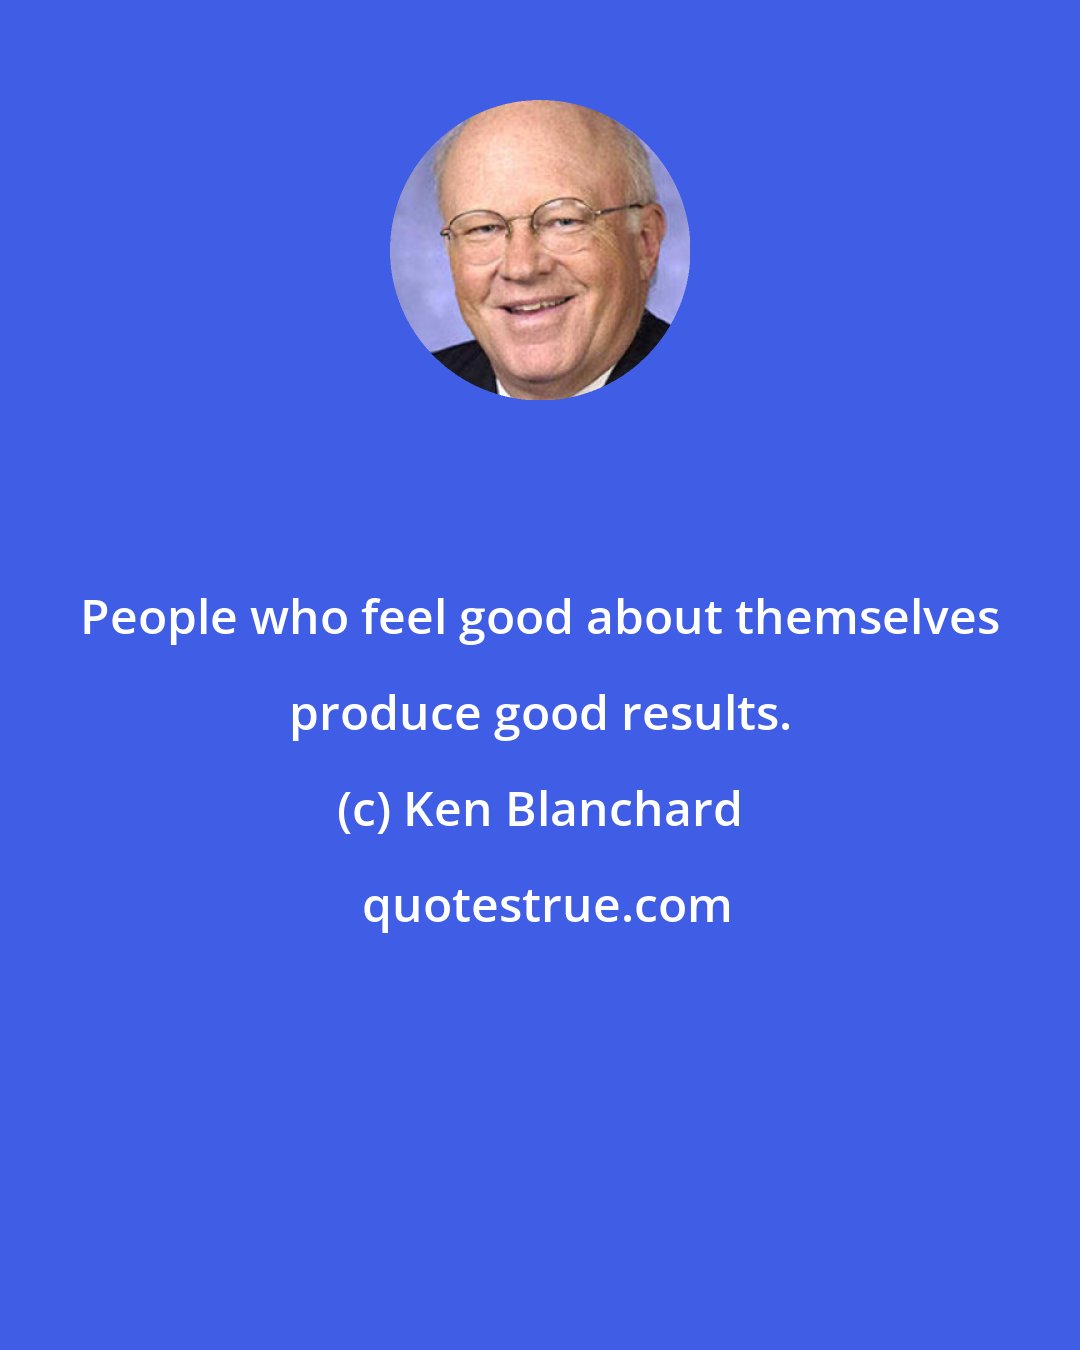 Ken Blanchard: People who feel good about themselves produce good results.